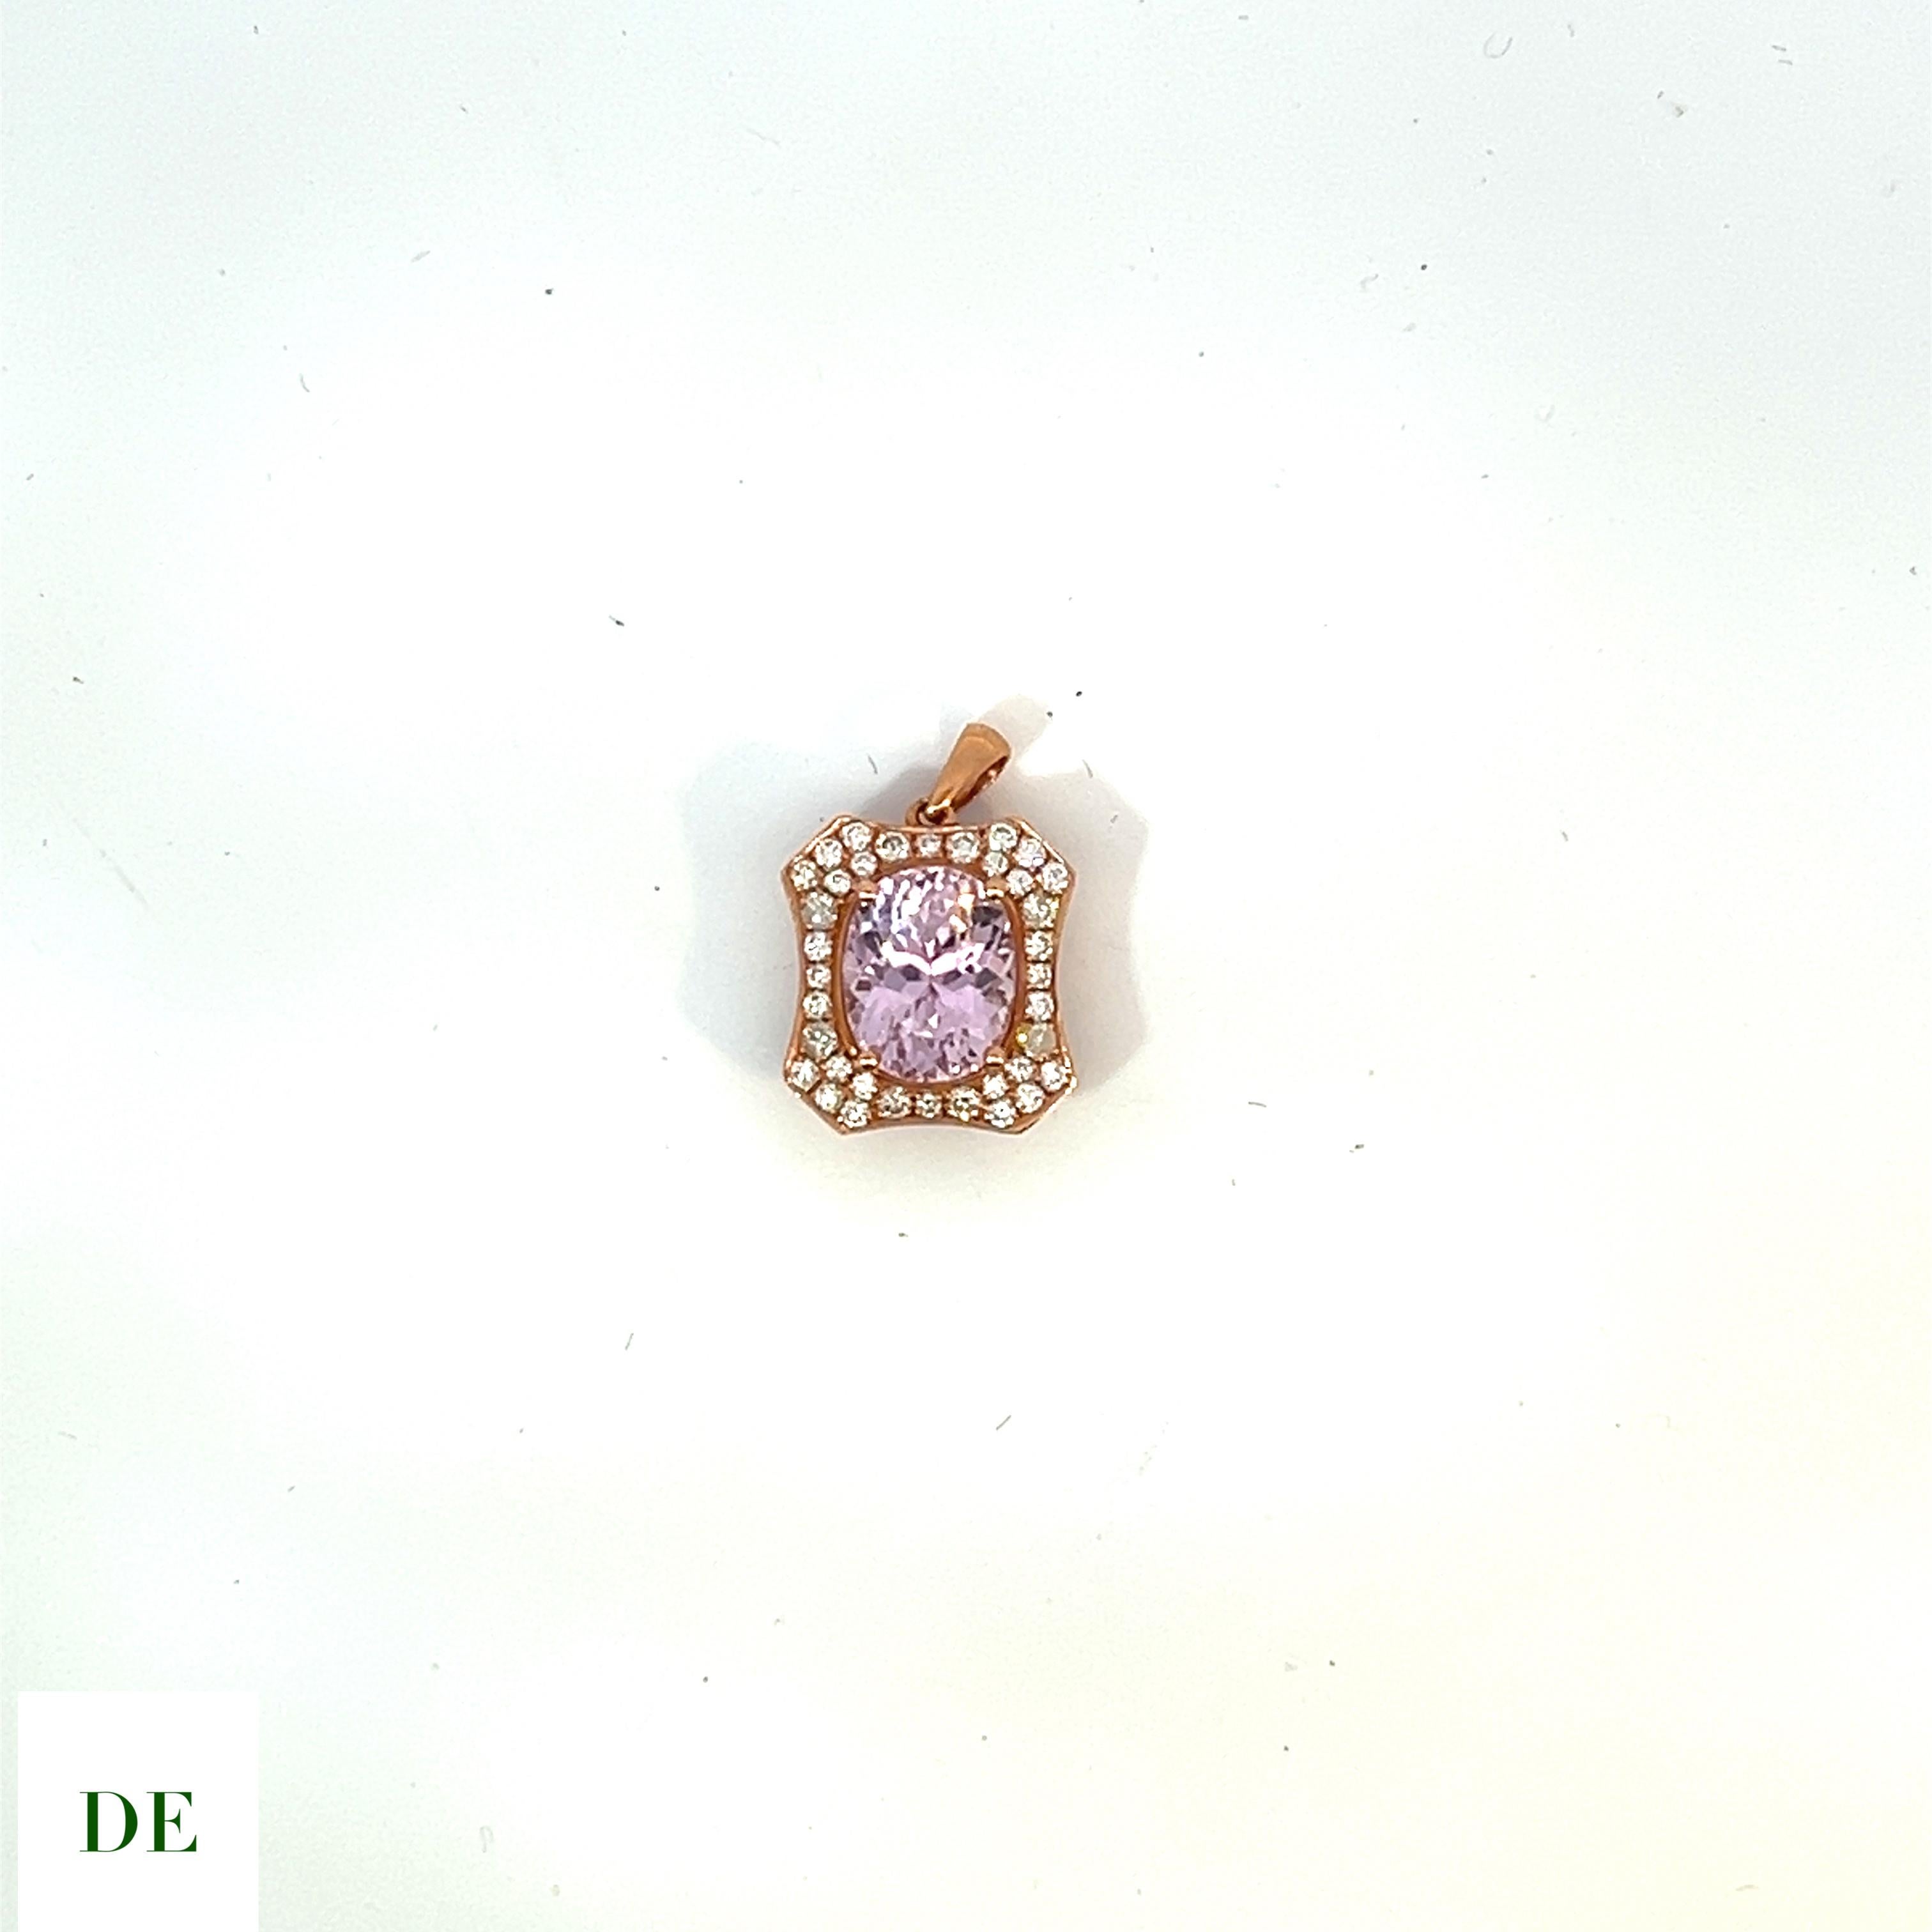 Introducing the epitome of elegance and sophistication - the Elegance 14k Timeless Classic Barbie Vivid Pink Pendant. This exquisite pendant showcases a mesmerizing 3.13 carat Kunzite gemstone, radiating with a vivid pink hue that captures attention